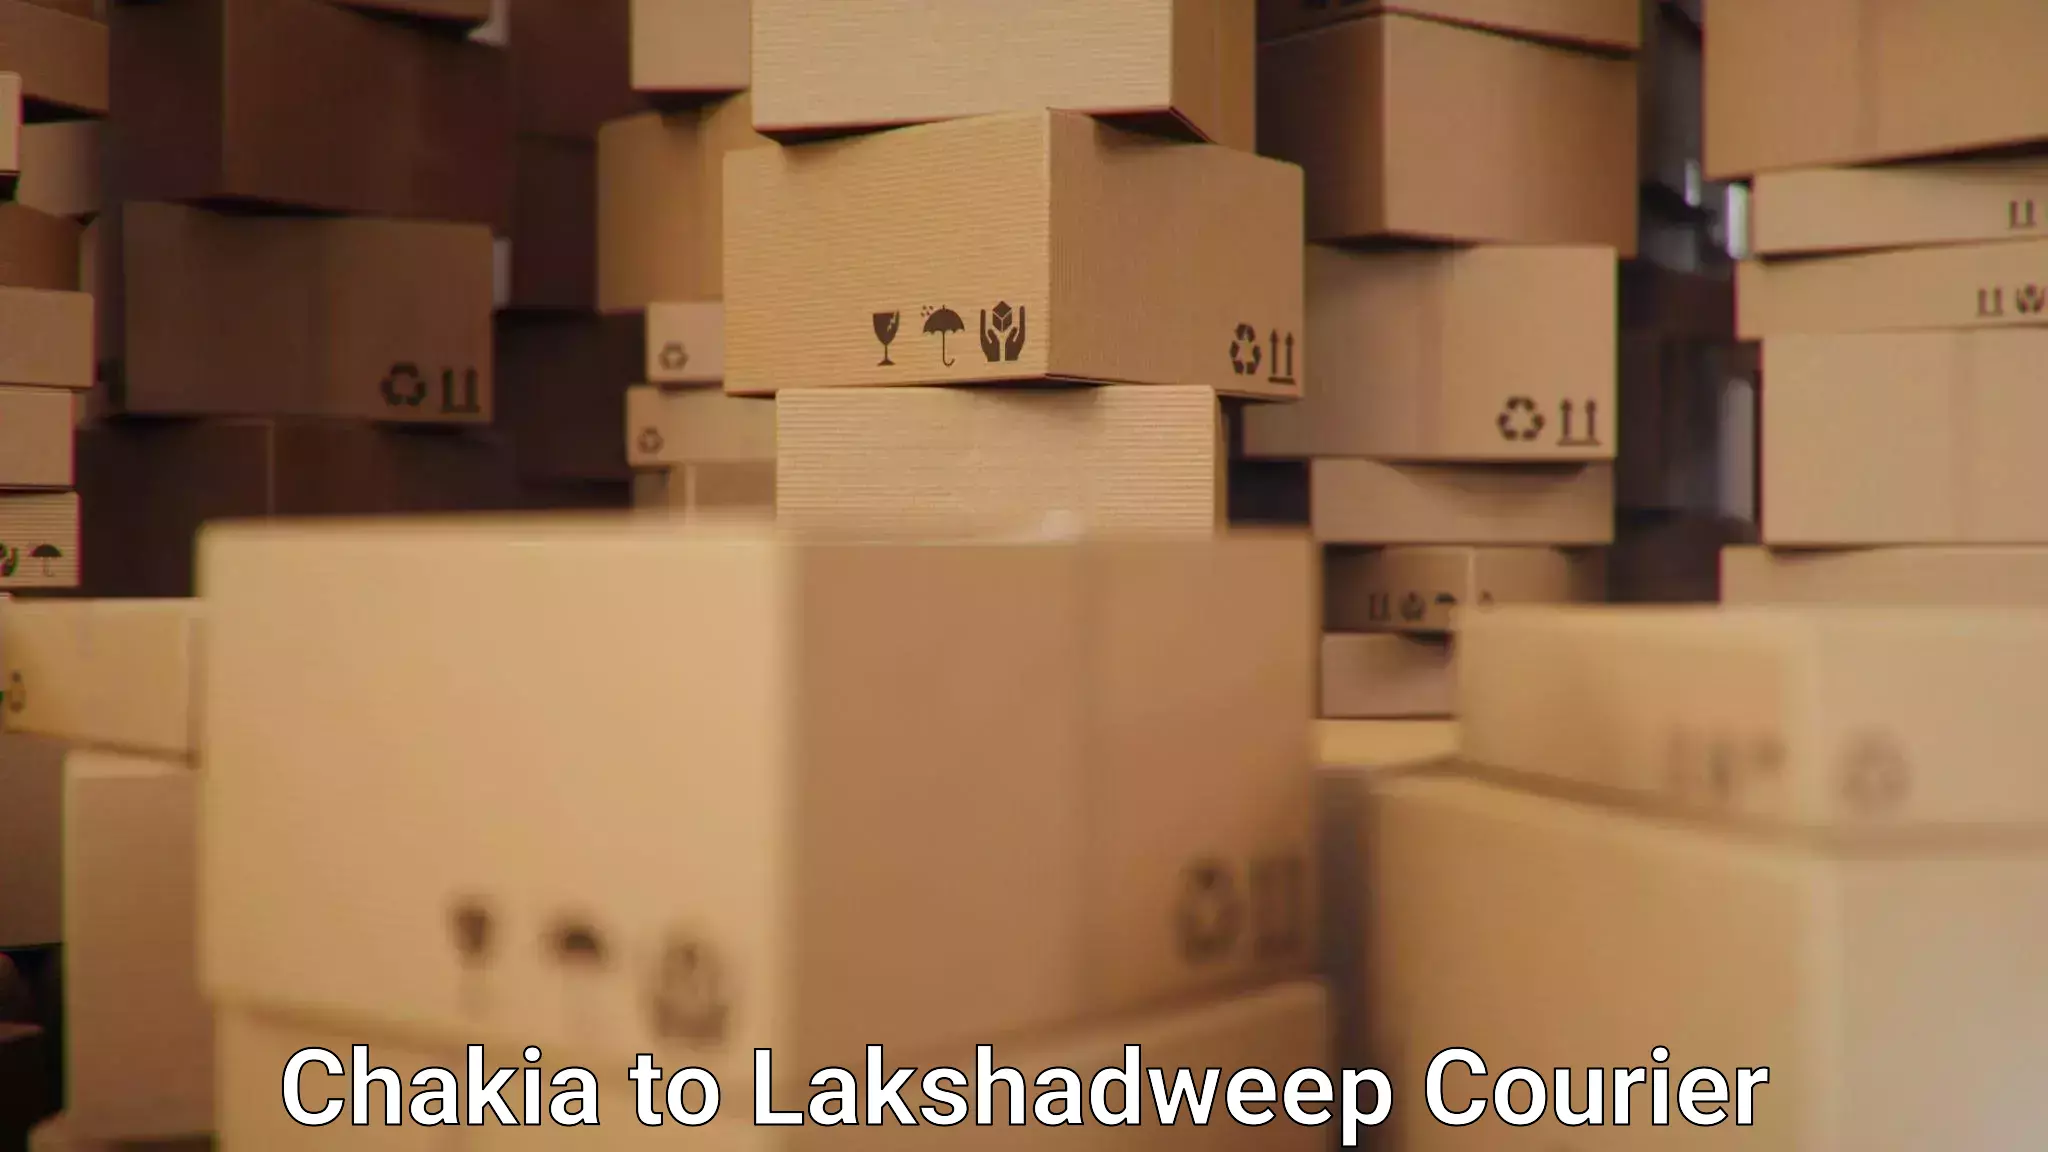 Enhanced tracking features Chakia to Lakshadweep